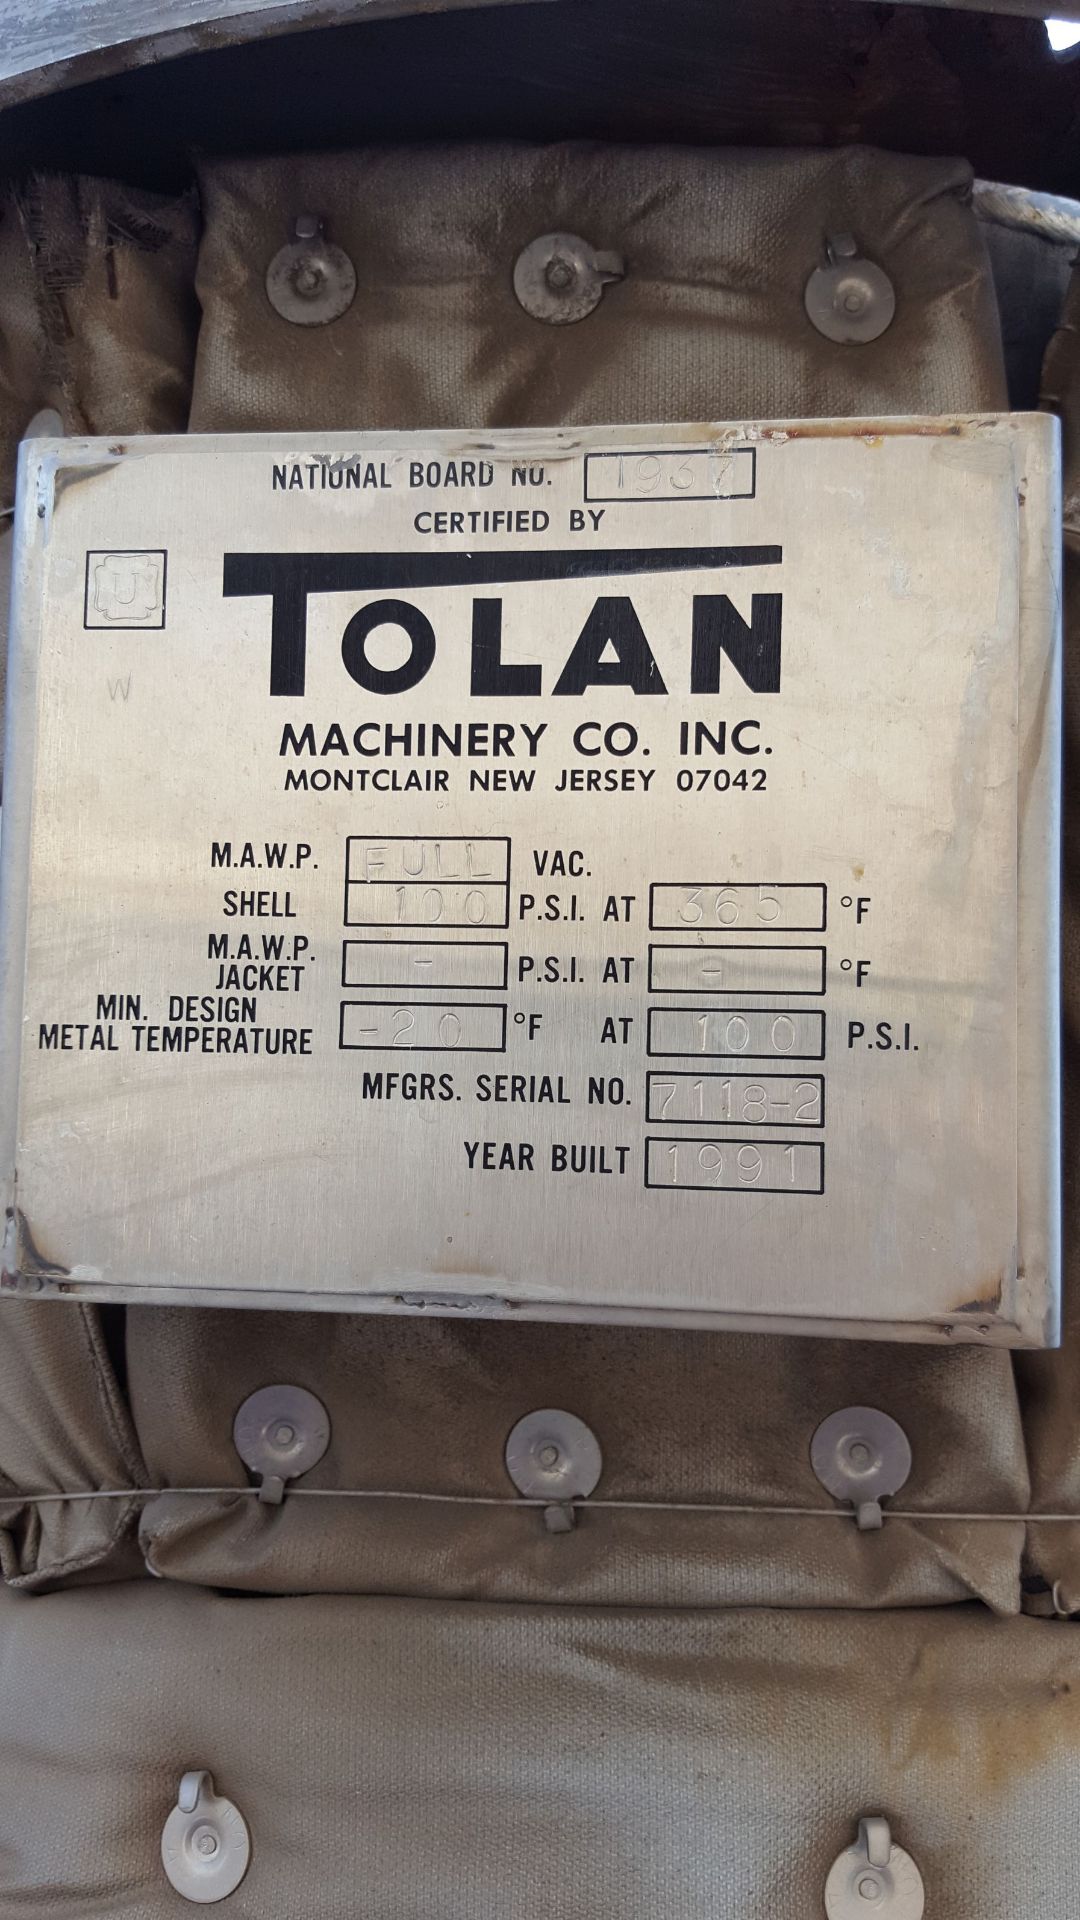 Tolan Machinery Co. Stainless Steel Vessel, 42" straight side x 21" dia. - Image 3 of 6